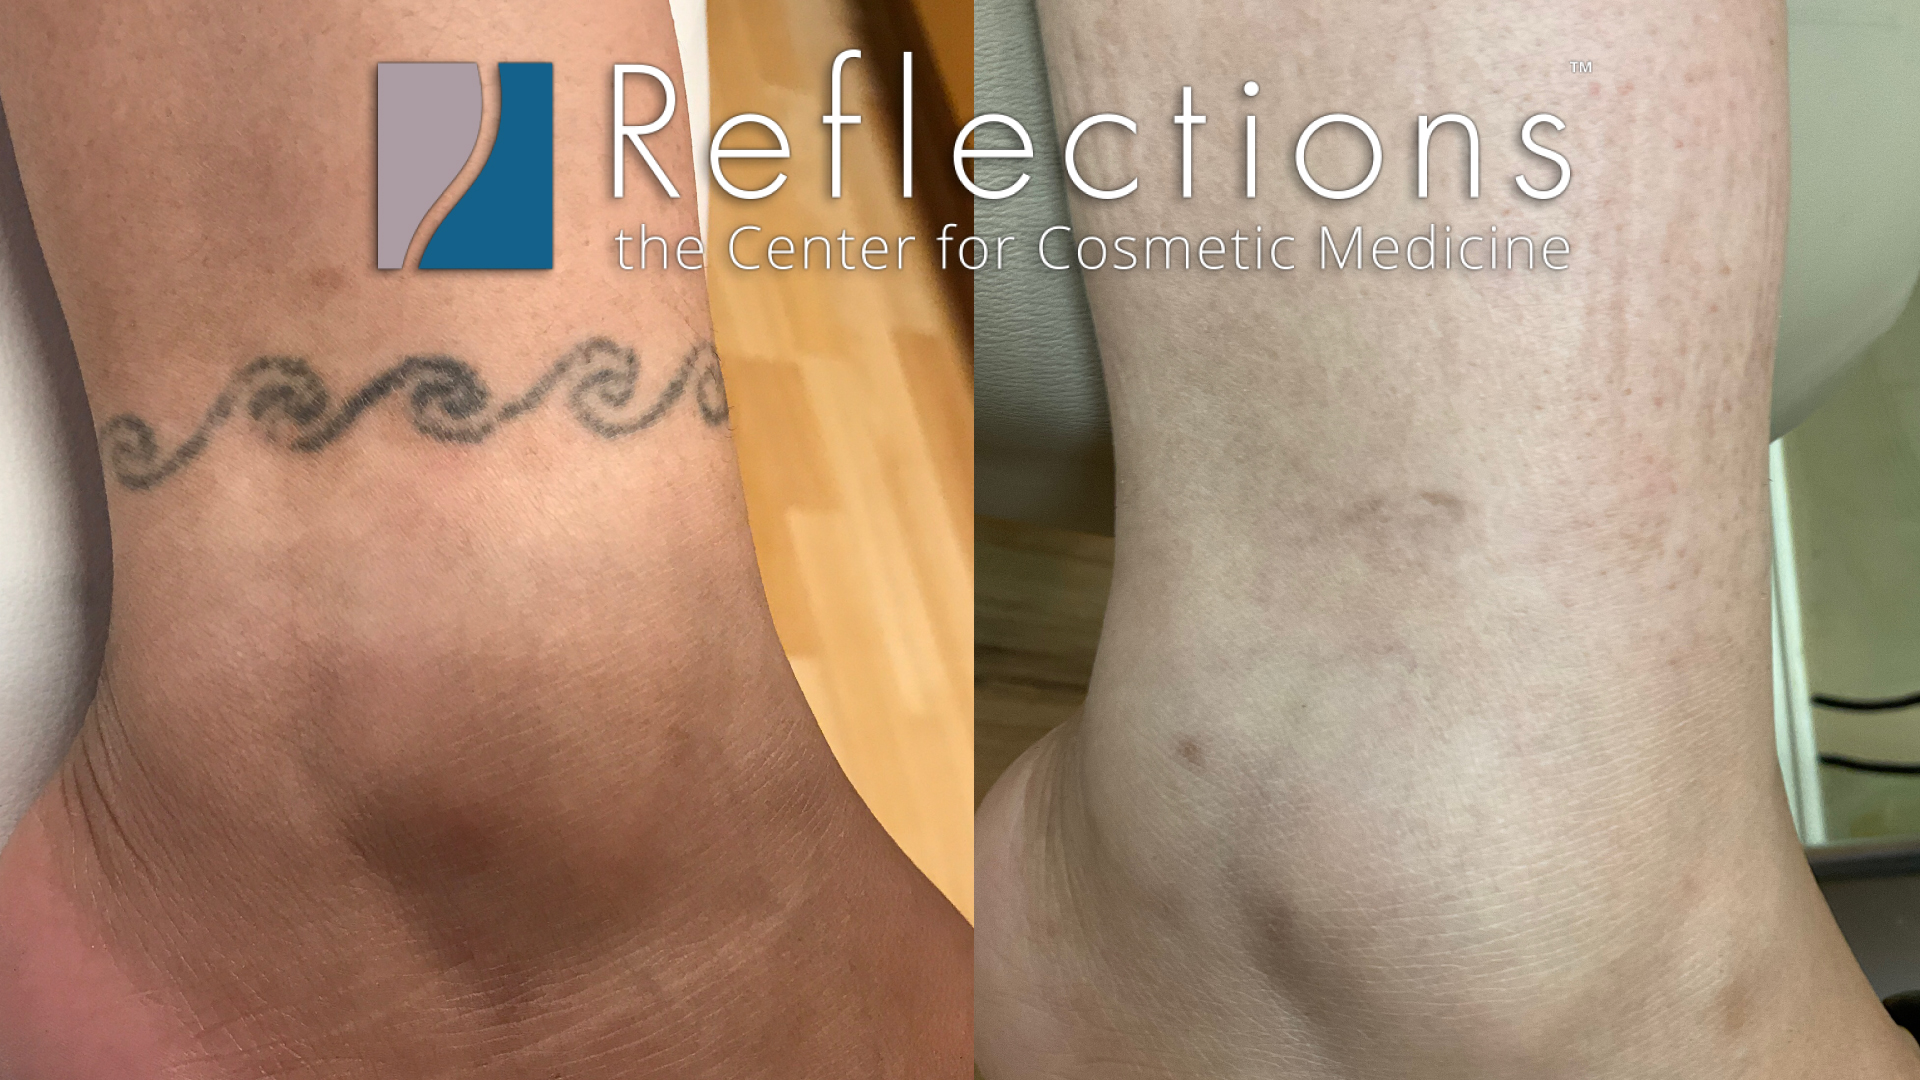 Ankle Wave Tattoo Removed with 3 Sessions of PiQo4 Laser Tattoo Removal for  Asian American Woman Before & After Photos New Jersey - Reflections Center